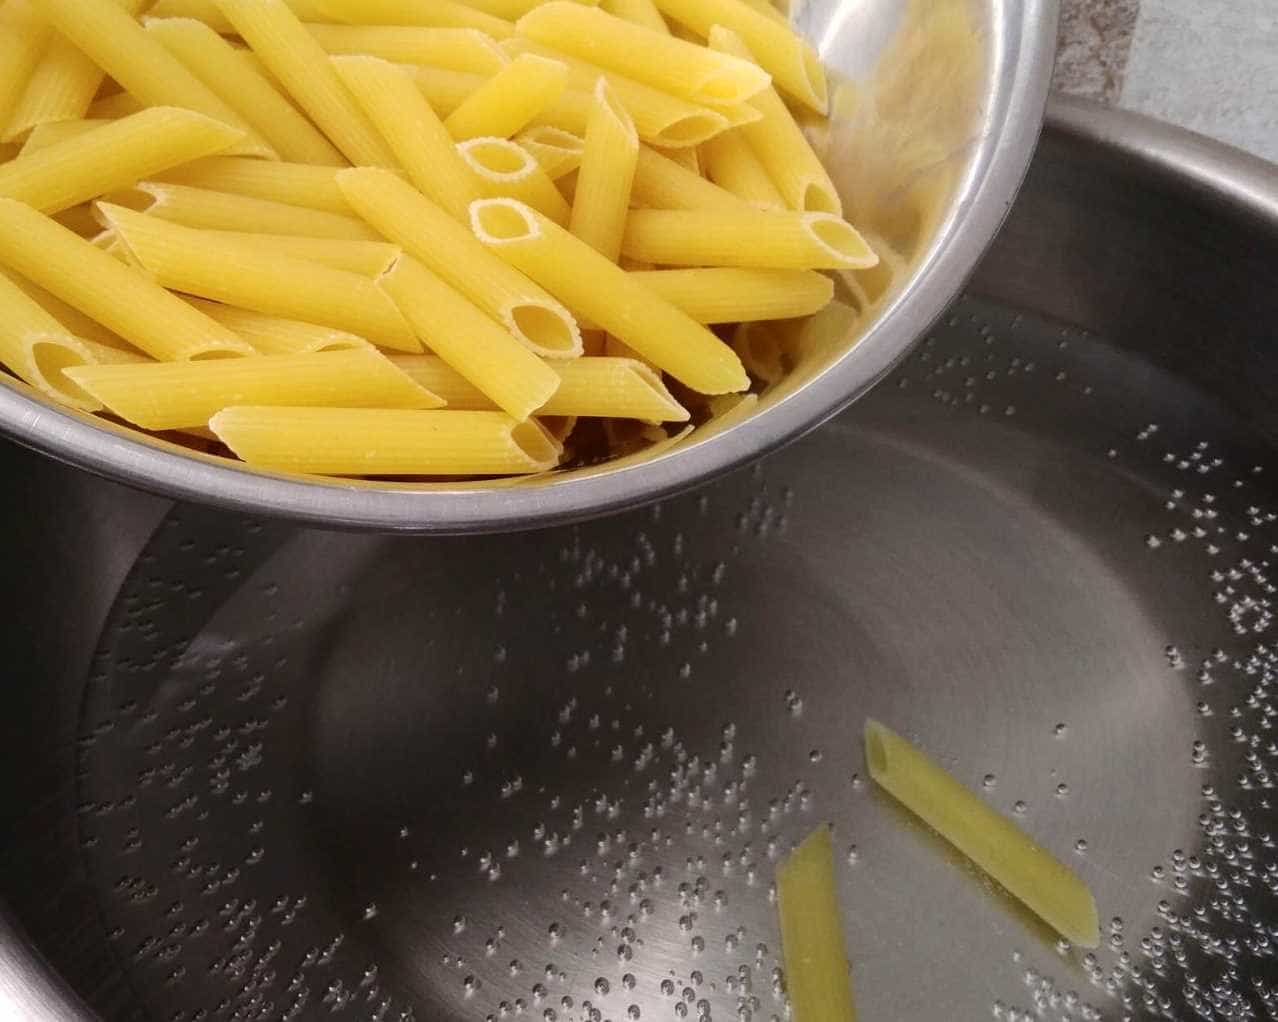 How to Cook the Pasta